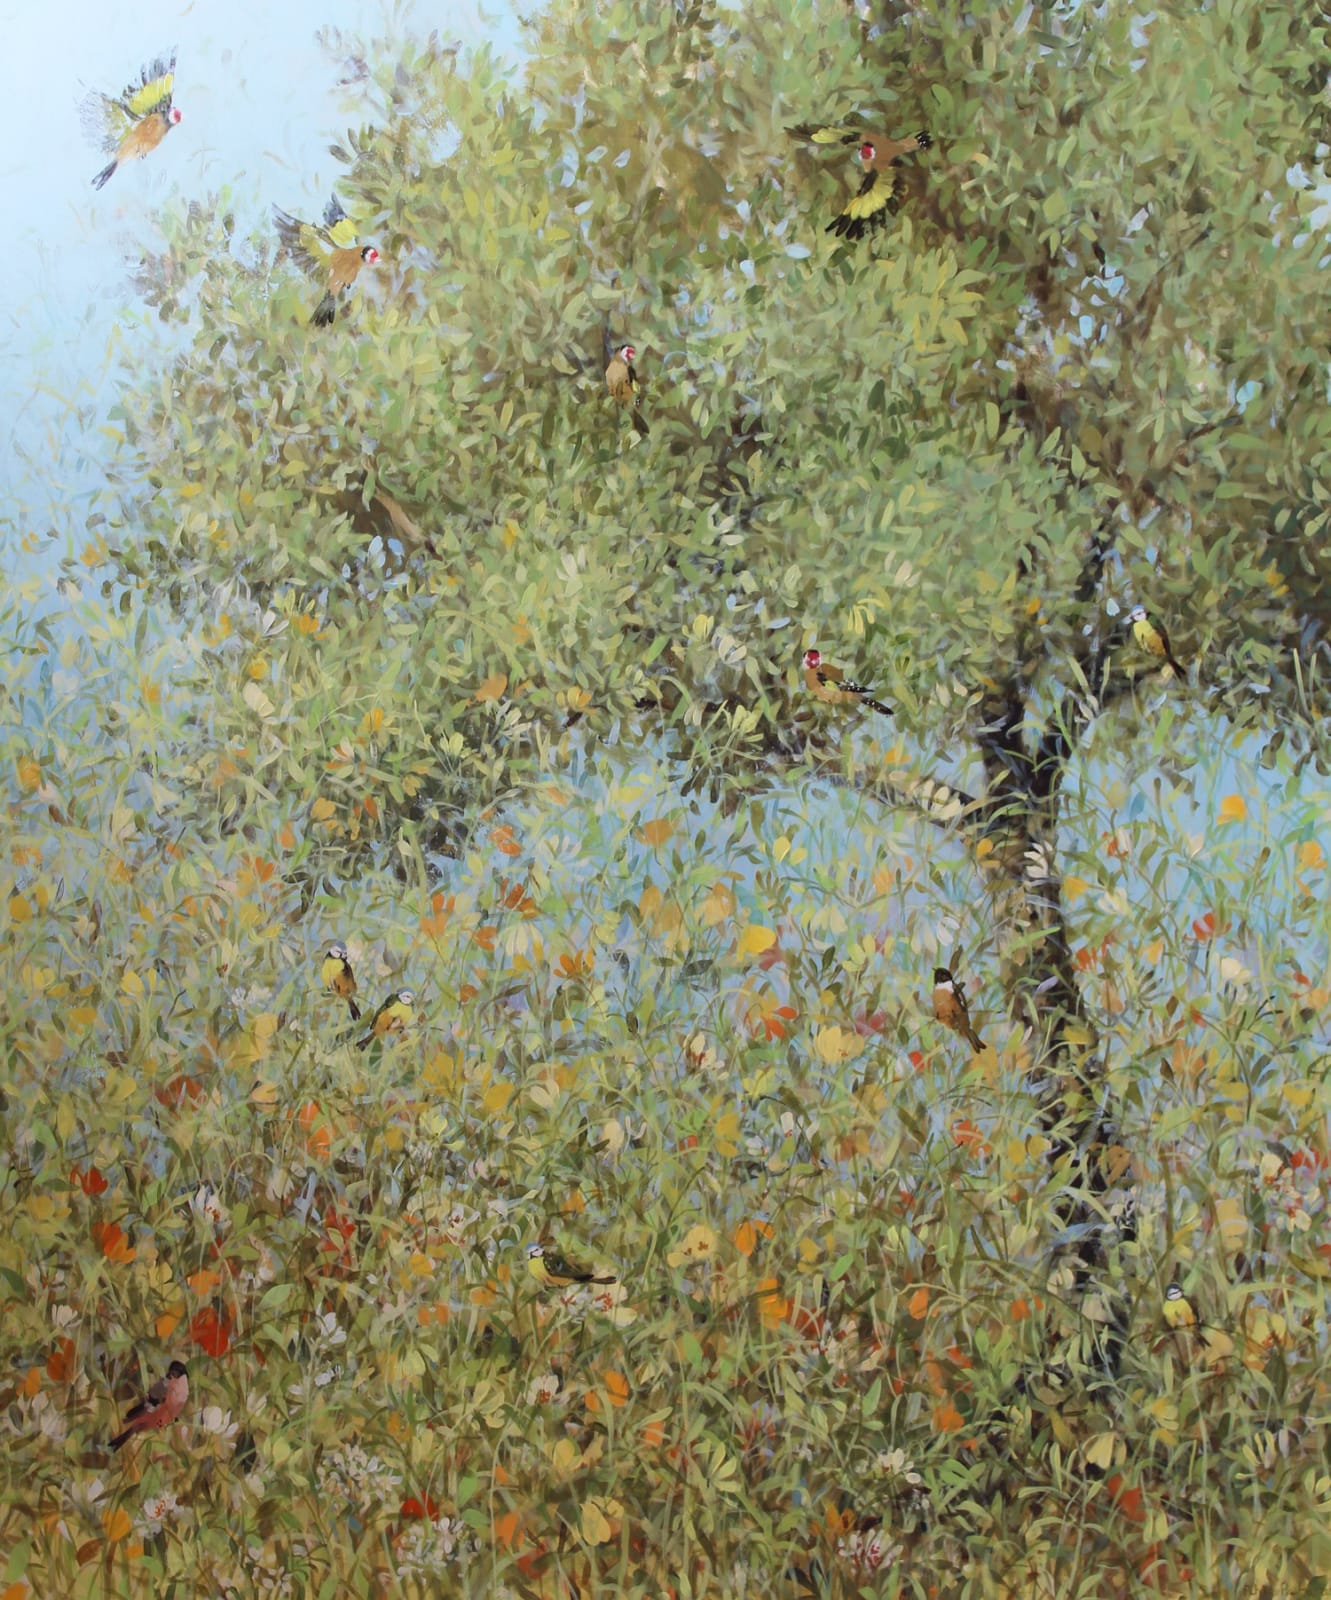 Fletcher Prentice, Olive Tree and Californian Poppies, 2020